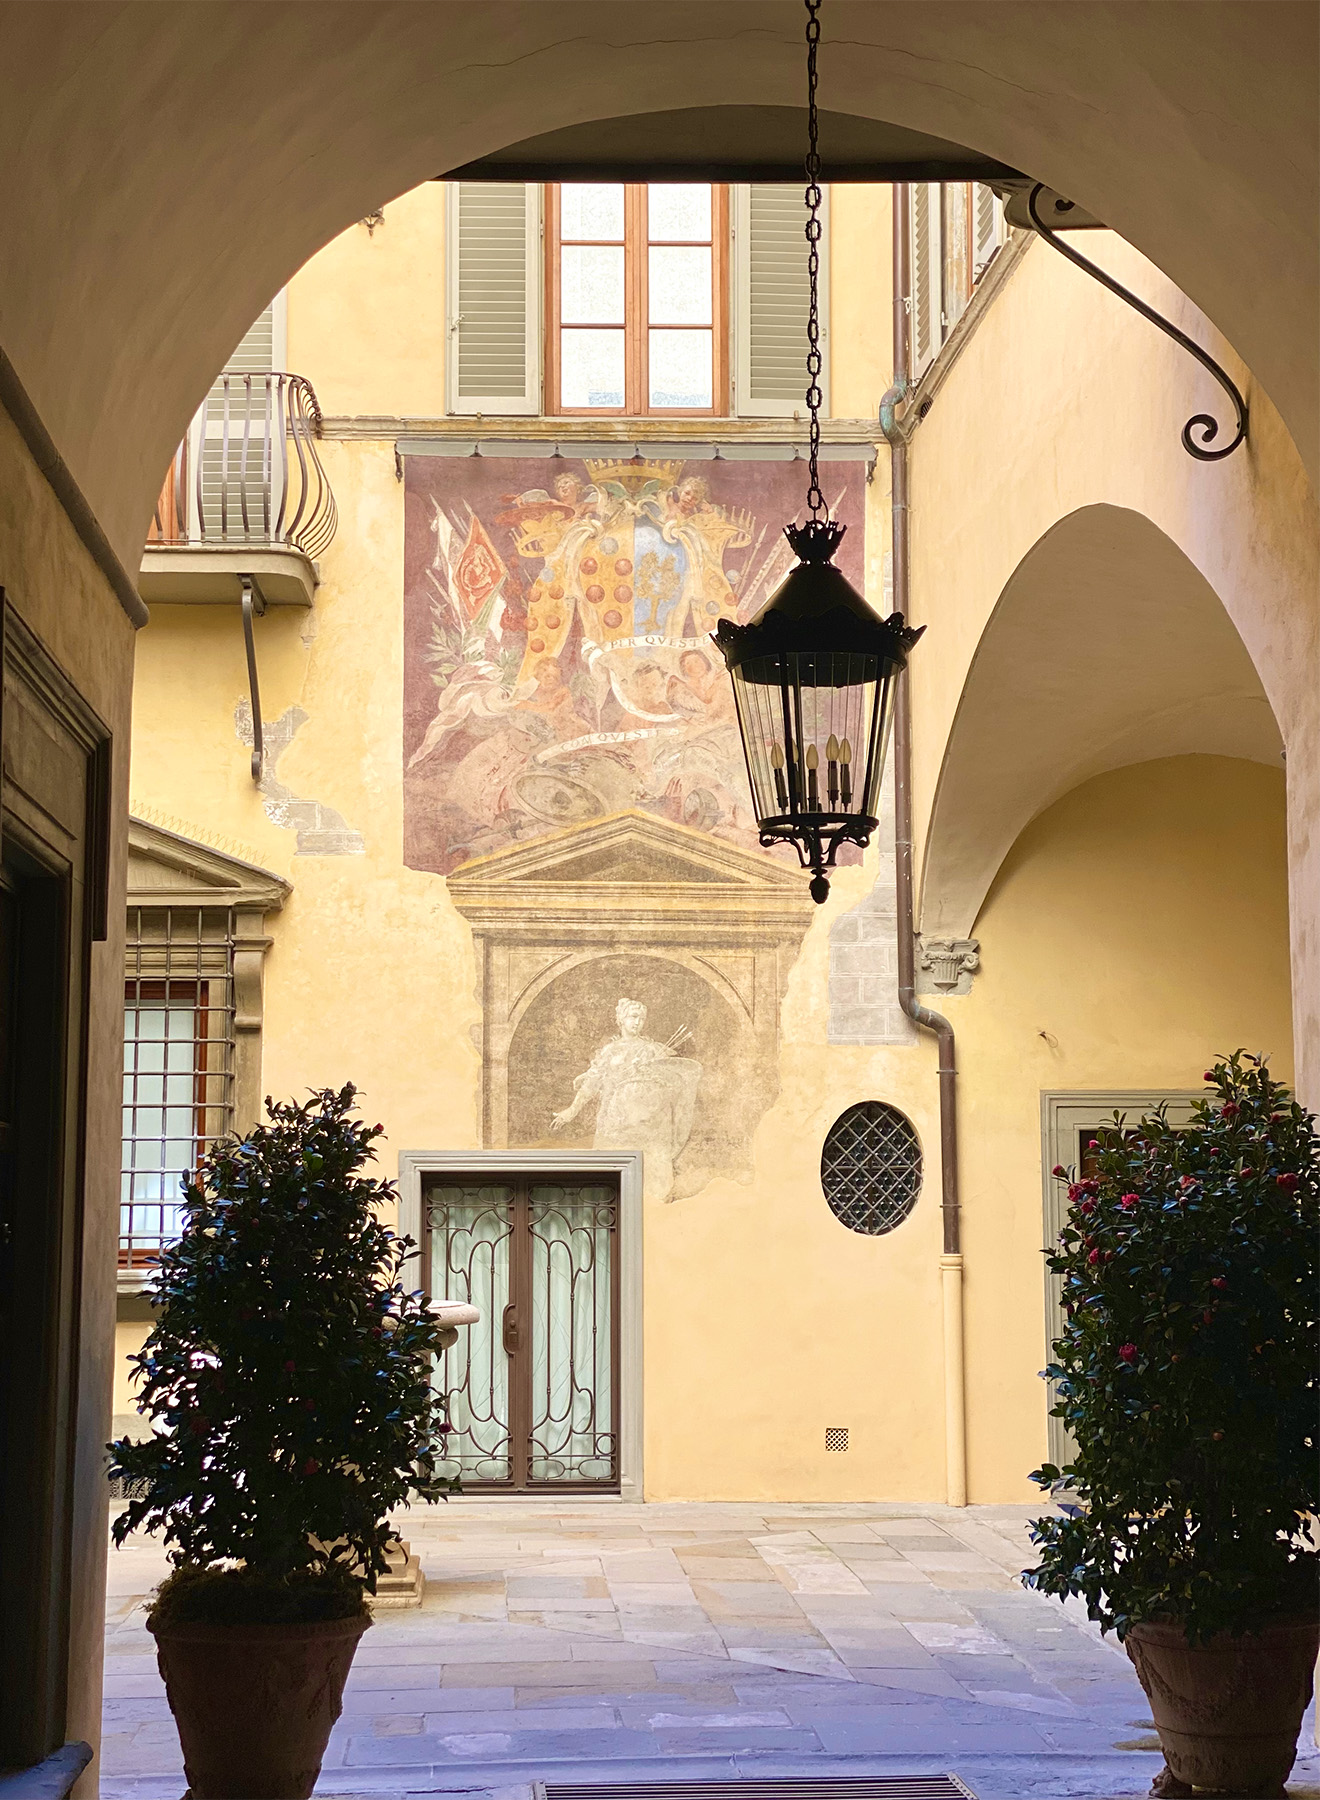 Details of a palace frescoes in the city center of Florence